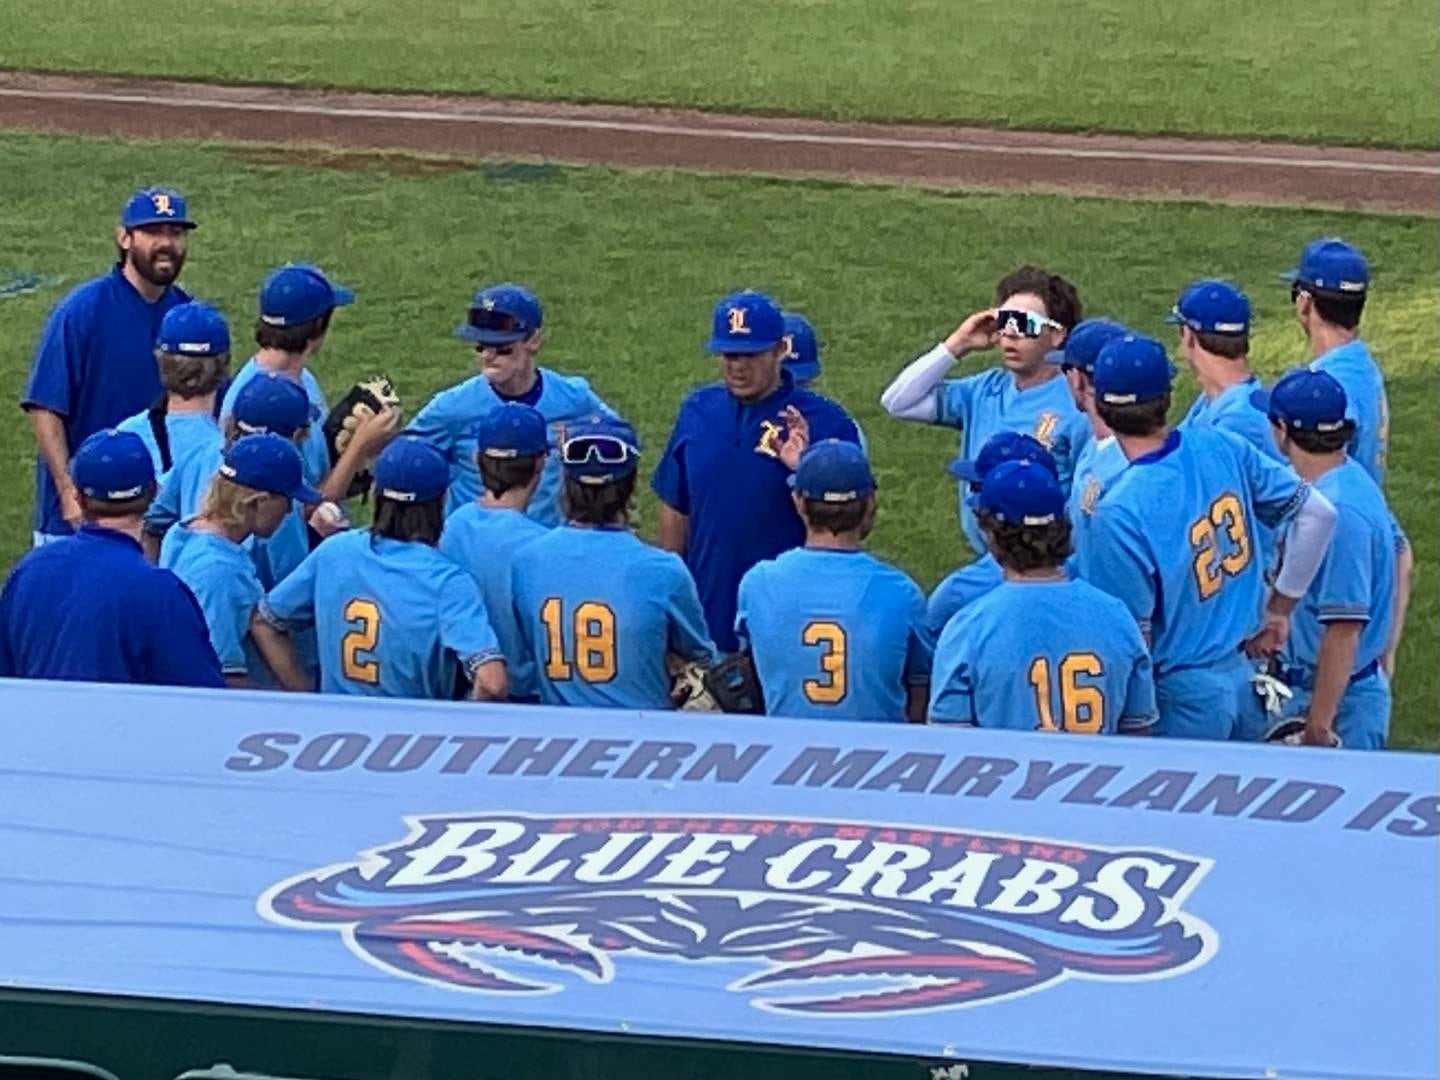 Liberty gathers in front of its dugout before Tuesday's Class 2A state baseball semifinal matchup with Patuxent. The Carroll County champs jumped out to a 3-0 lead but was unable to hold it as Patuxent rallied for a 5-4 victory at Regency Furniture Stadium in Southern Maryland.